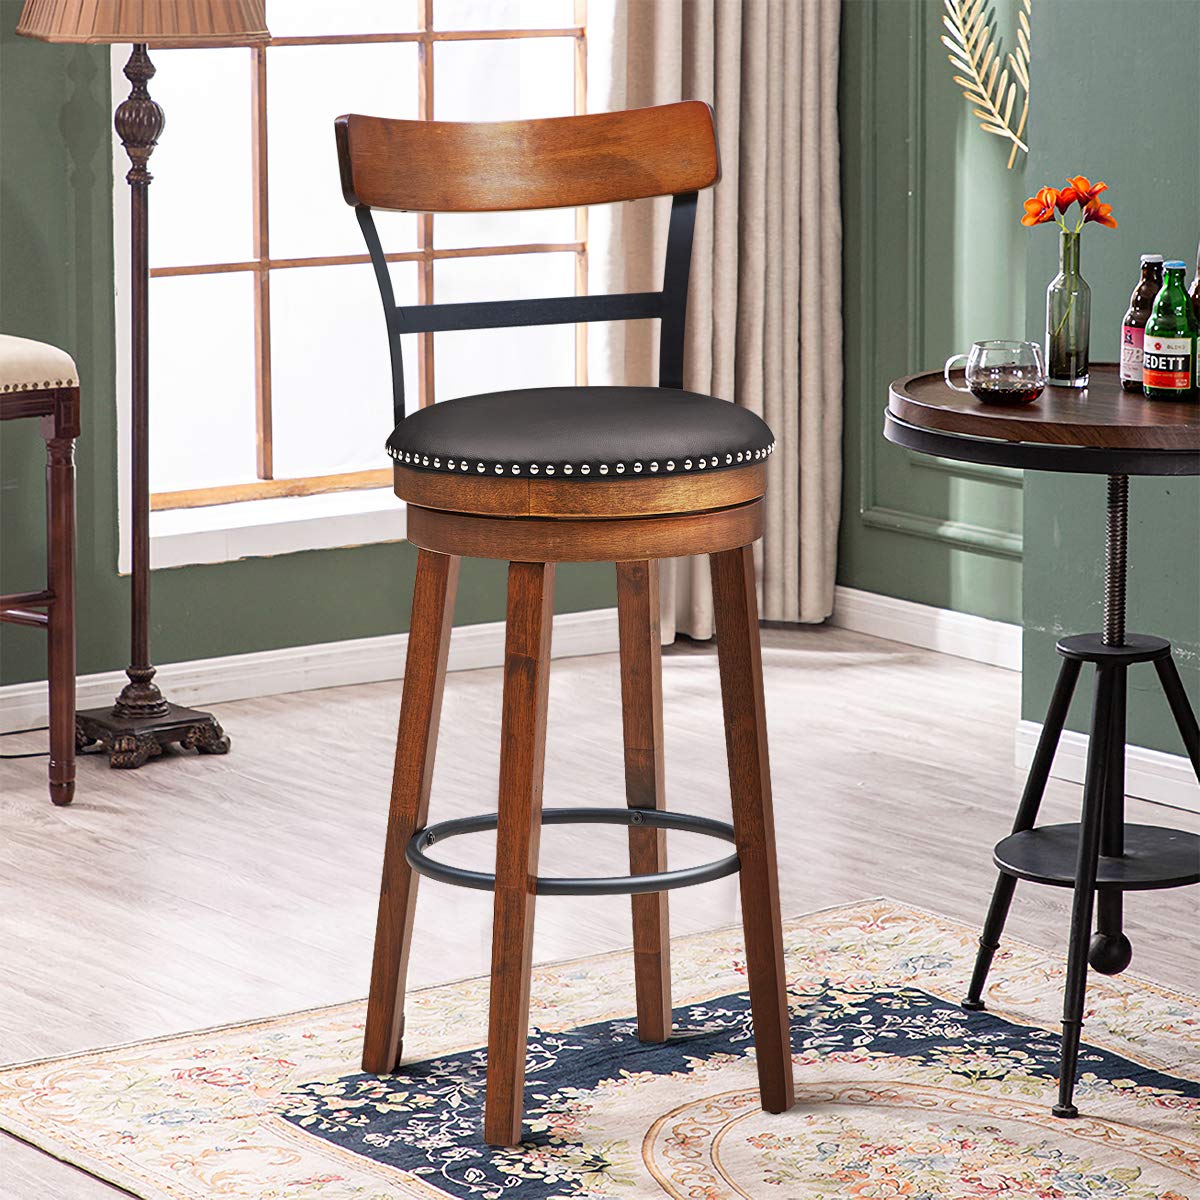 360-Degree Swivel Stools with Leather Padded Seat, Single Slat Ladder Back & Solid Rubber Wood Legs